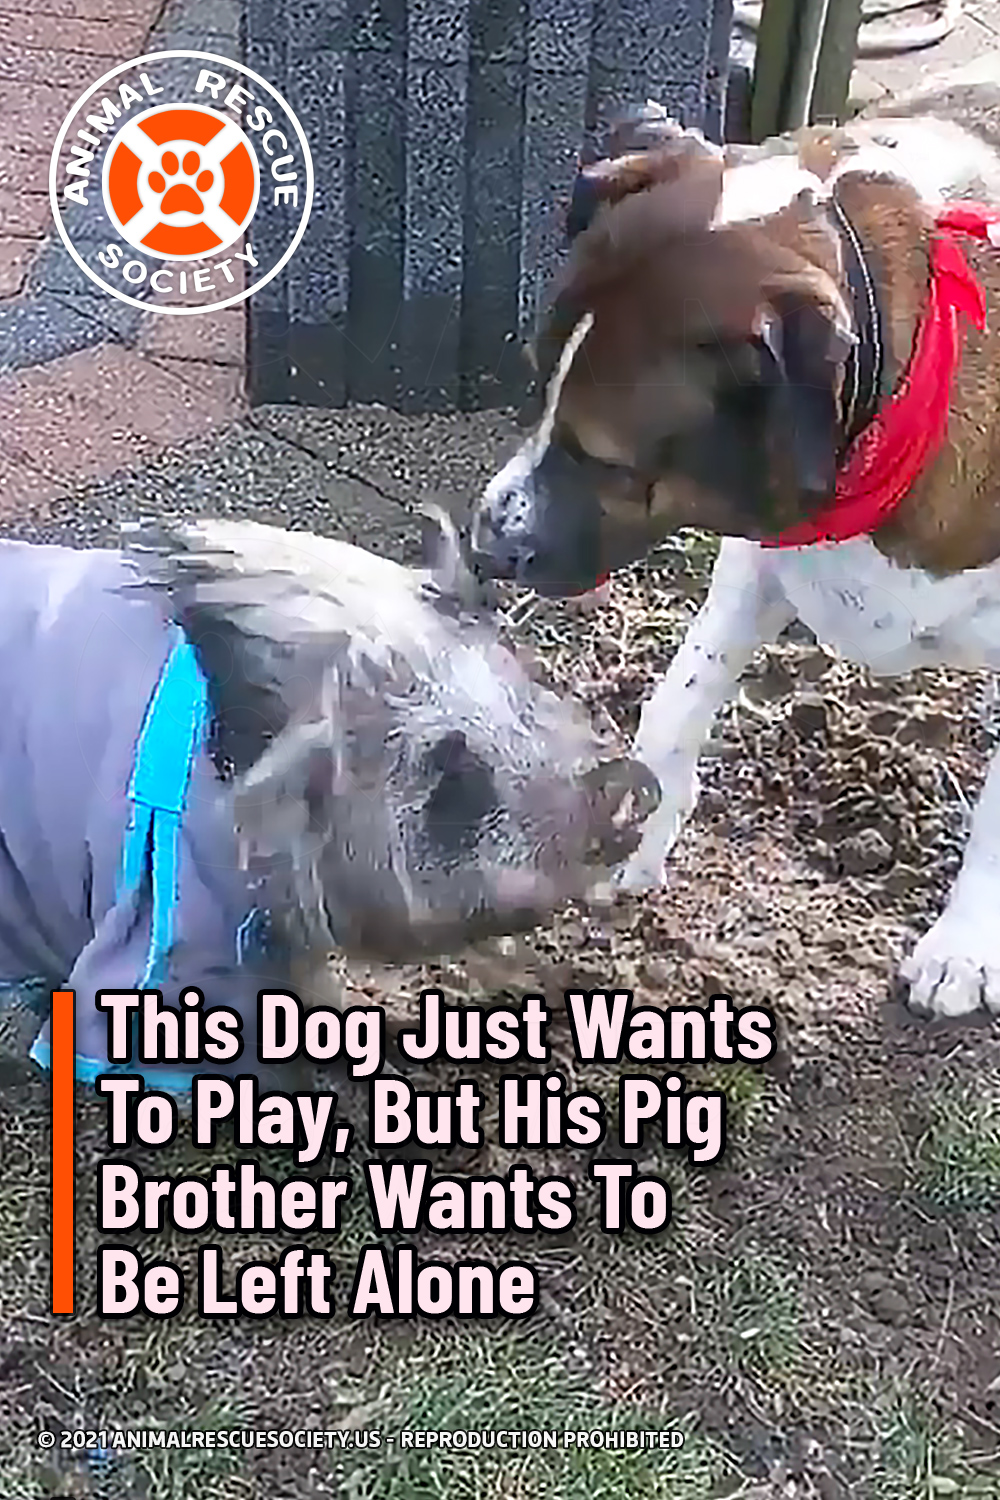 This Dog Just Wants To Play, But His Pig Brother Wants To Be Left Alone